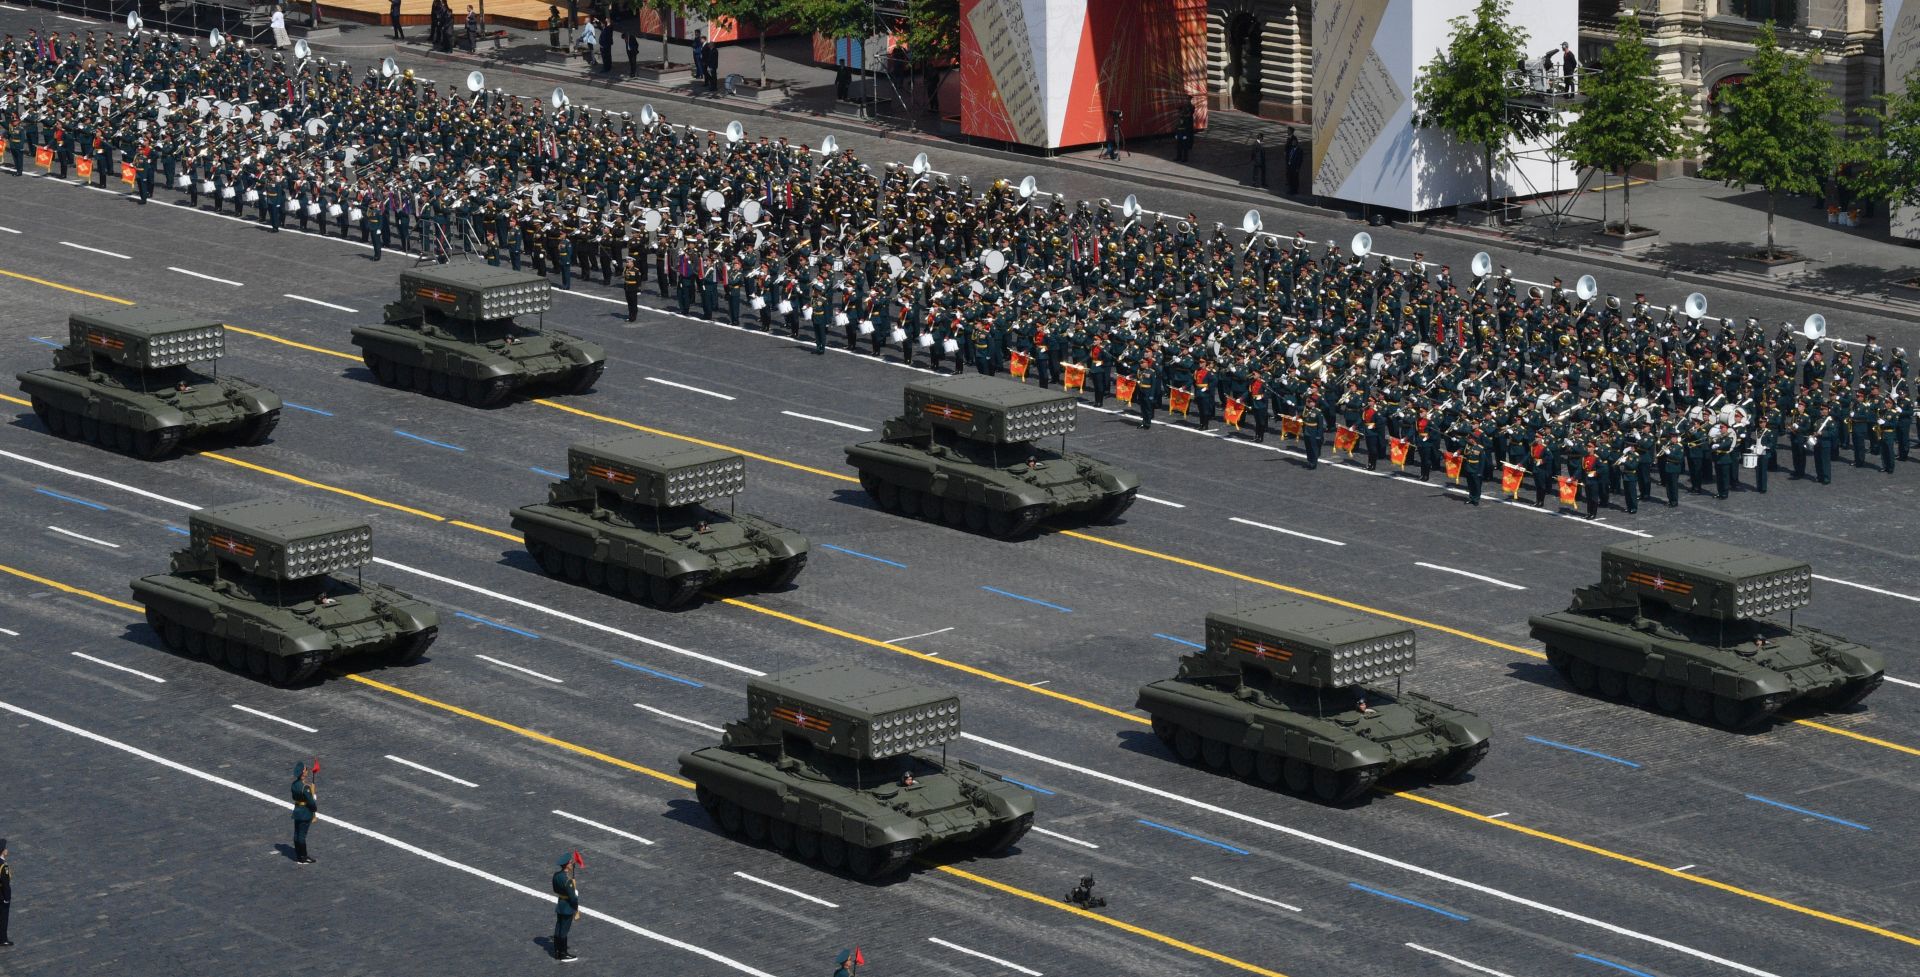 epa08505337 Russian TOS-1A Solntsepyok (Blazing Sun) multiple thermobaric rocket launchers take part in a military parade, marking the 75th anniversary of the Nazi defeat, in Moscow, Russia, 24 June 2020. The Victory Day military parade normally is held on 09 May, the nation's most important secular holiday, but this year it was postponed due to the coronavirus pandemic.  EPA/Evgeny Biyatov / Host photo agency POOL MANDATORY CREDIT